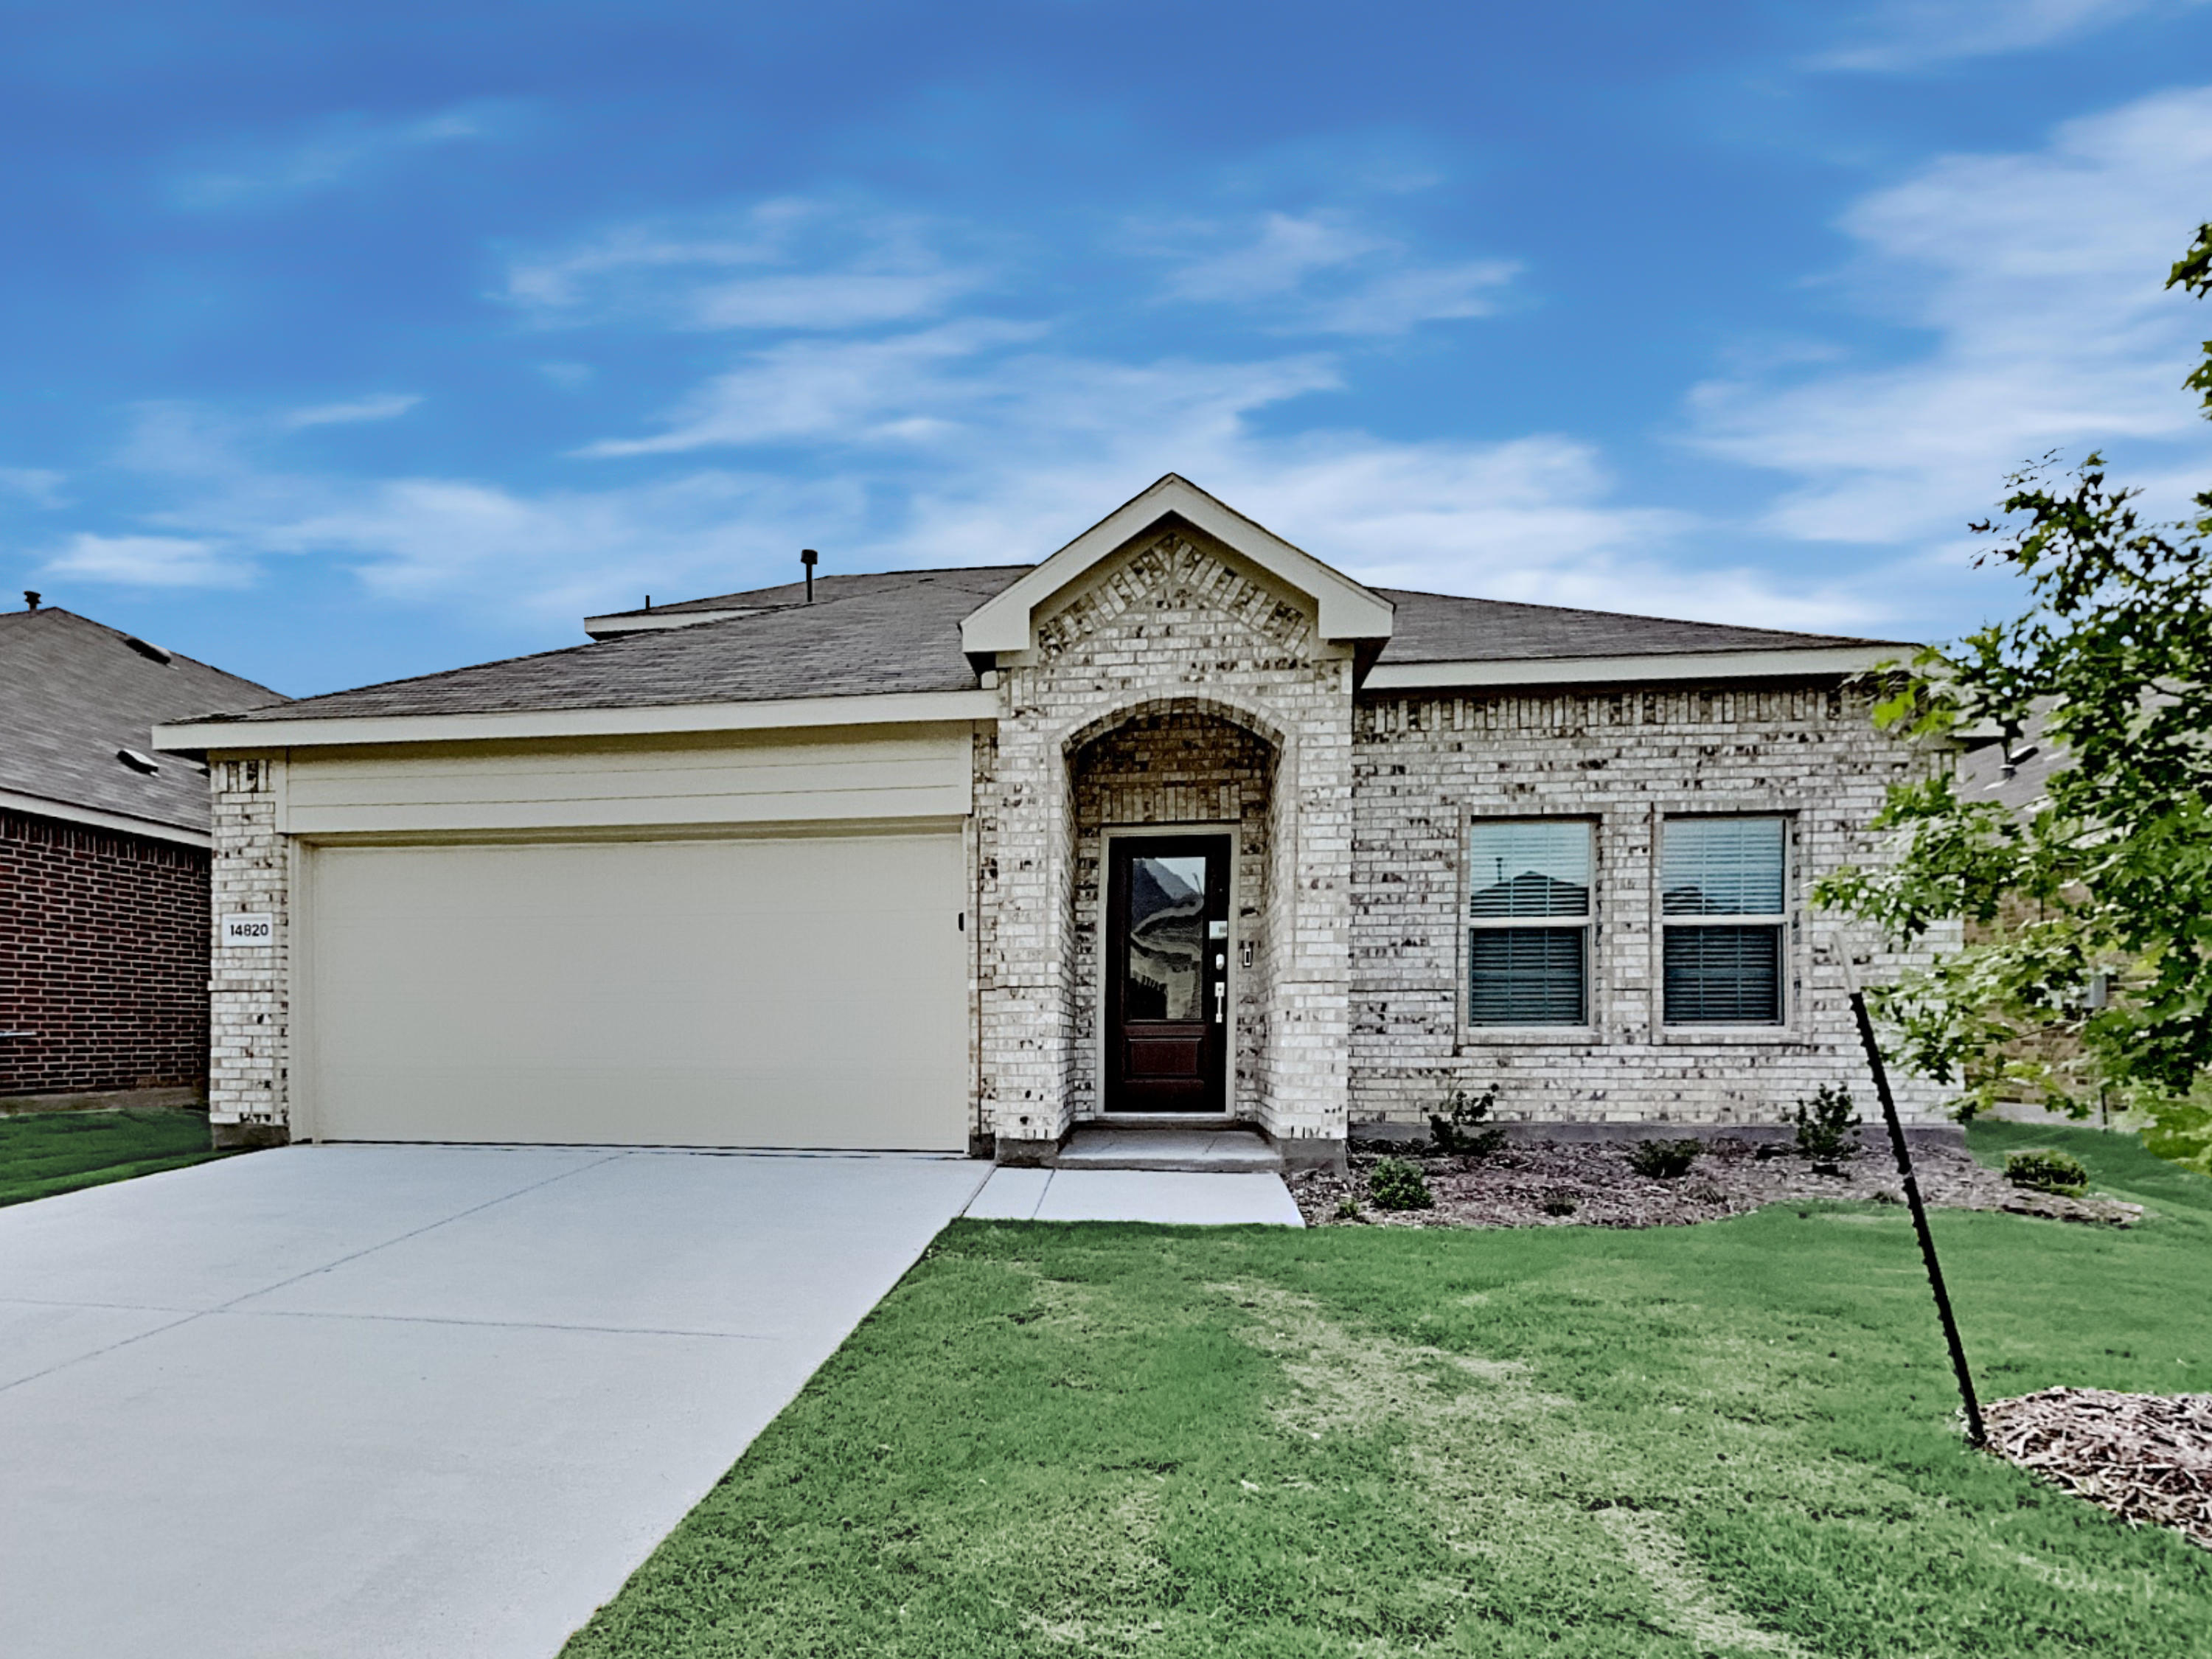 Lovely home with two-car garage and covered porch at Invitation Homes Dallas.